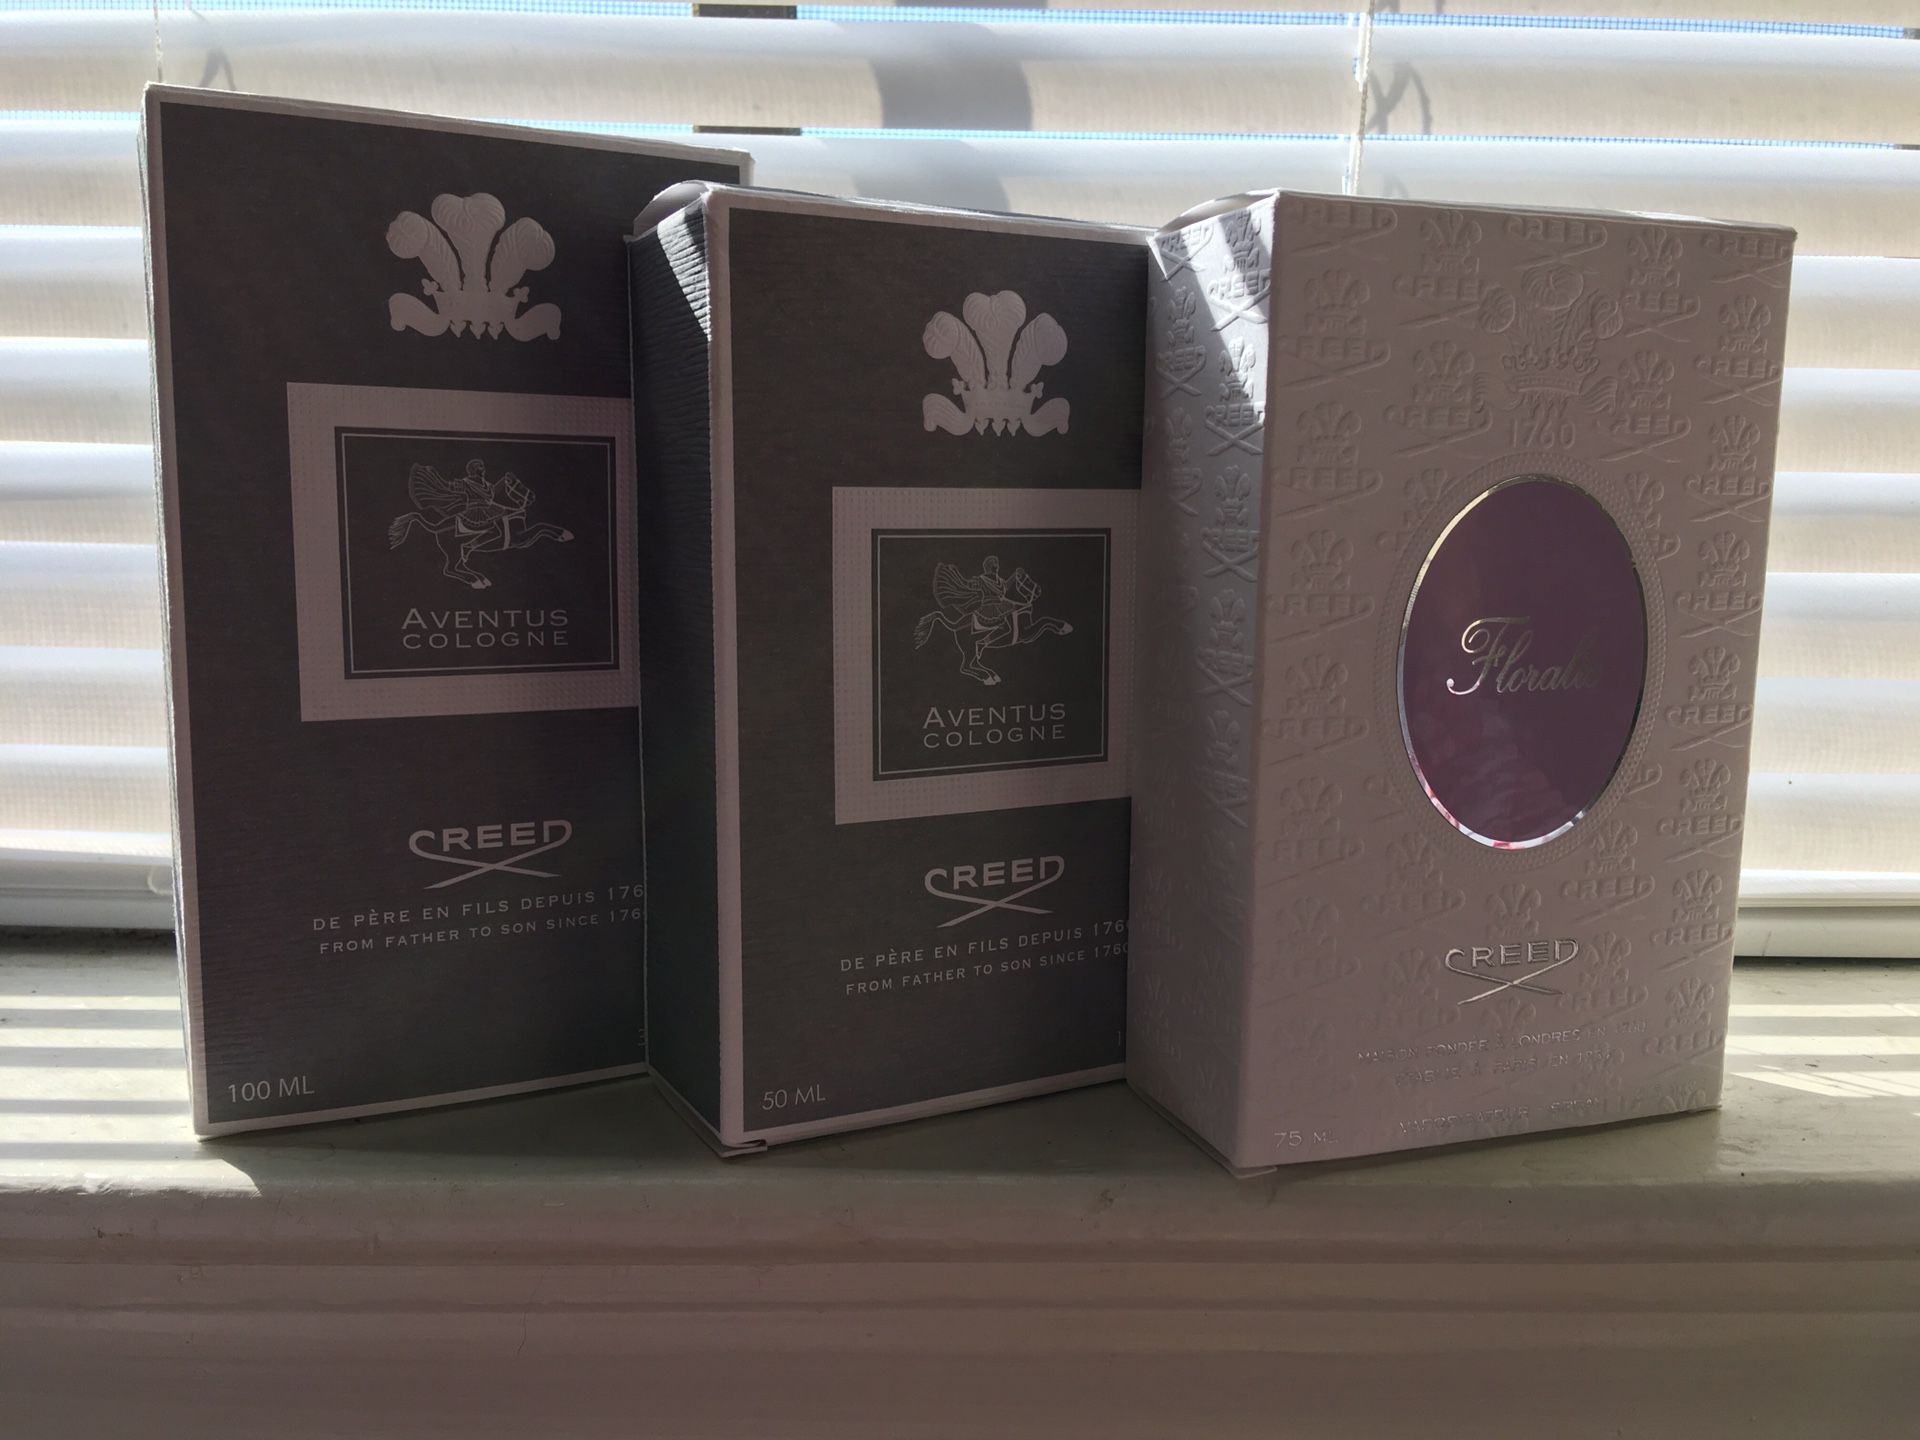 CREED COLOGNE AND PERFUME!